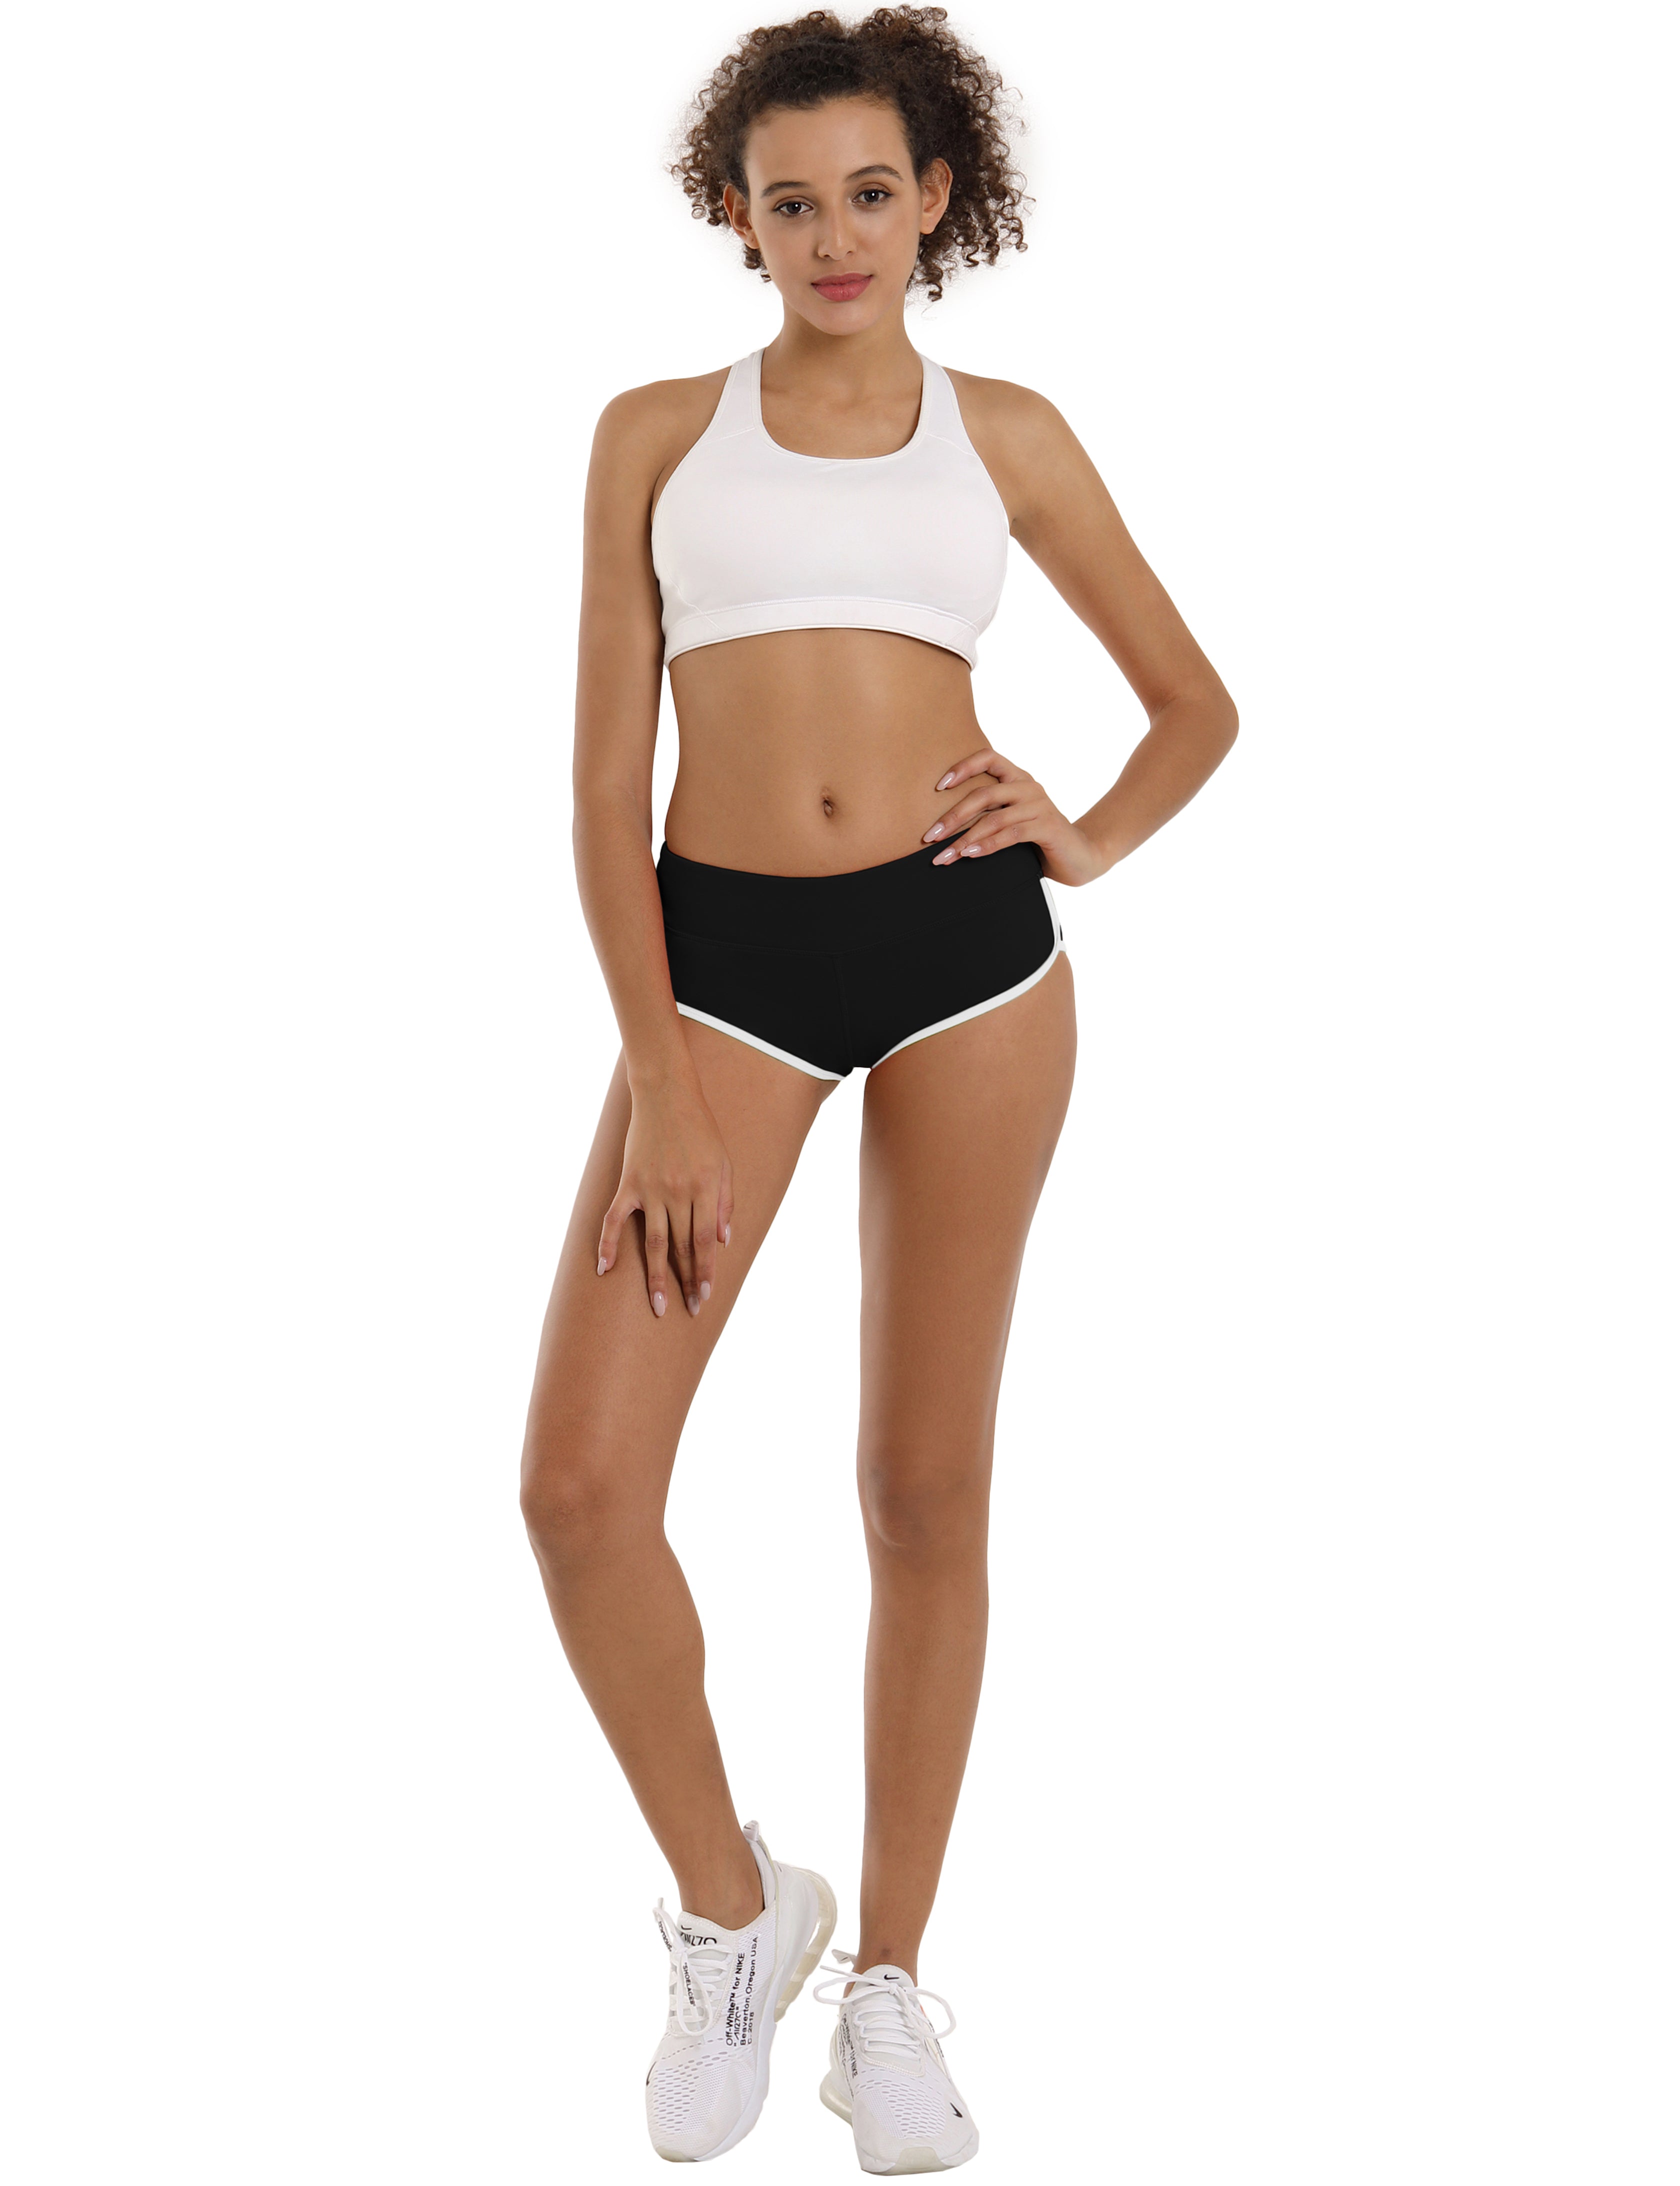 Sexy Booty Gym Shorts black Sleek, soft, smooth and totally comfortable: our newest sexy style is here. Softest-ever fabric High elasticity High density 4-way stretch Fabric doesn't attract lint easily No see-through Moisture-wicking Machine wash 75%Nylon/25%Spandex